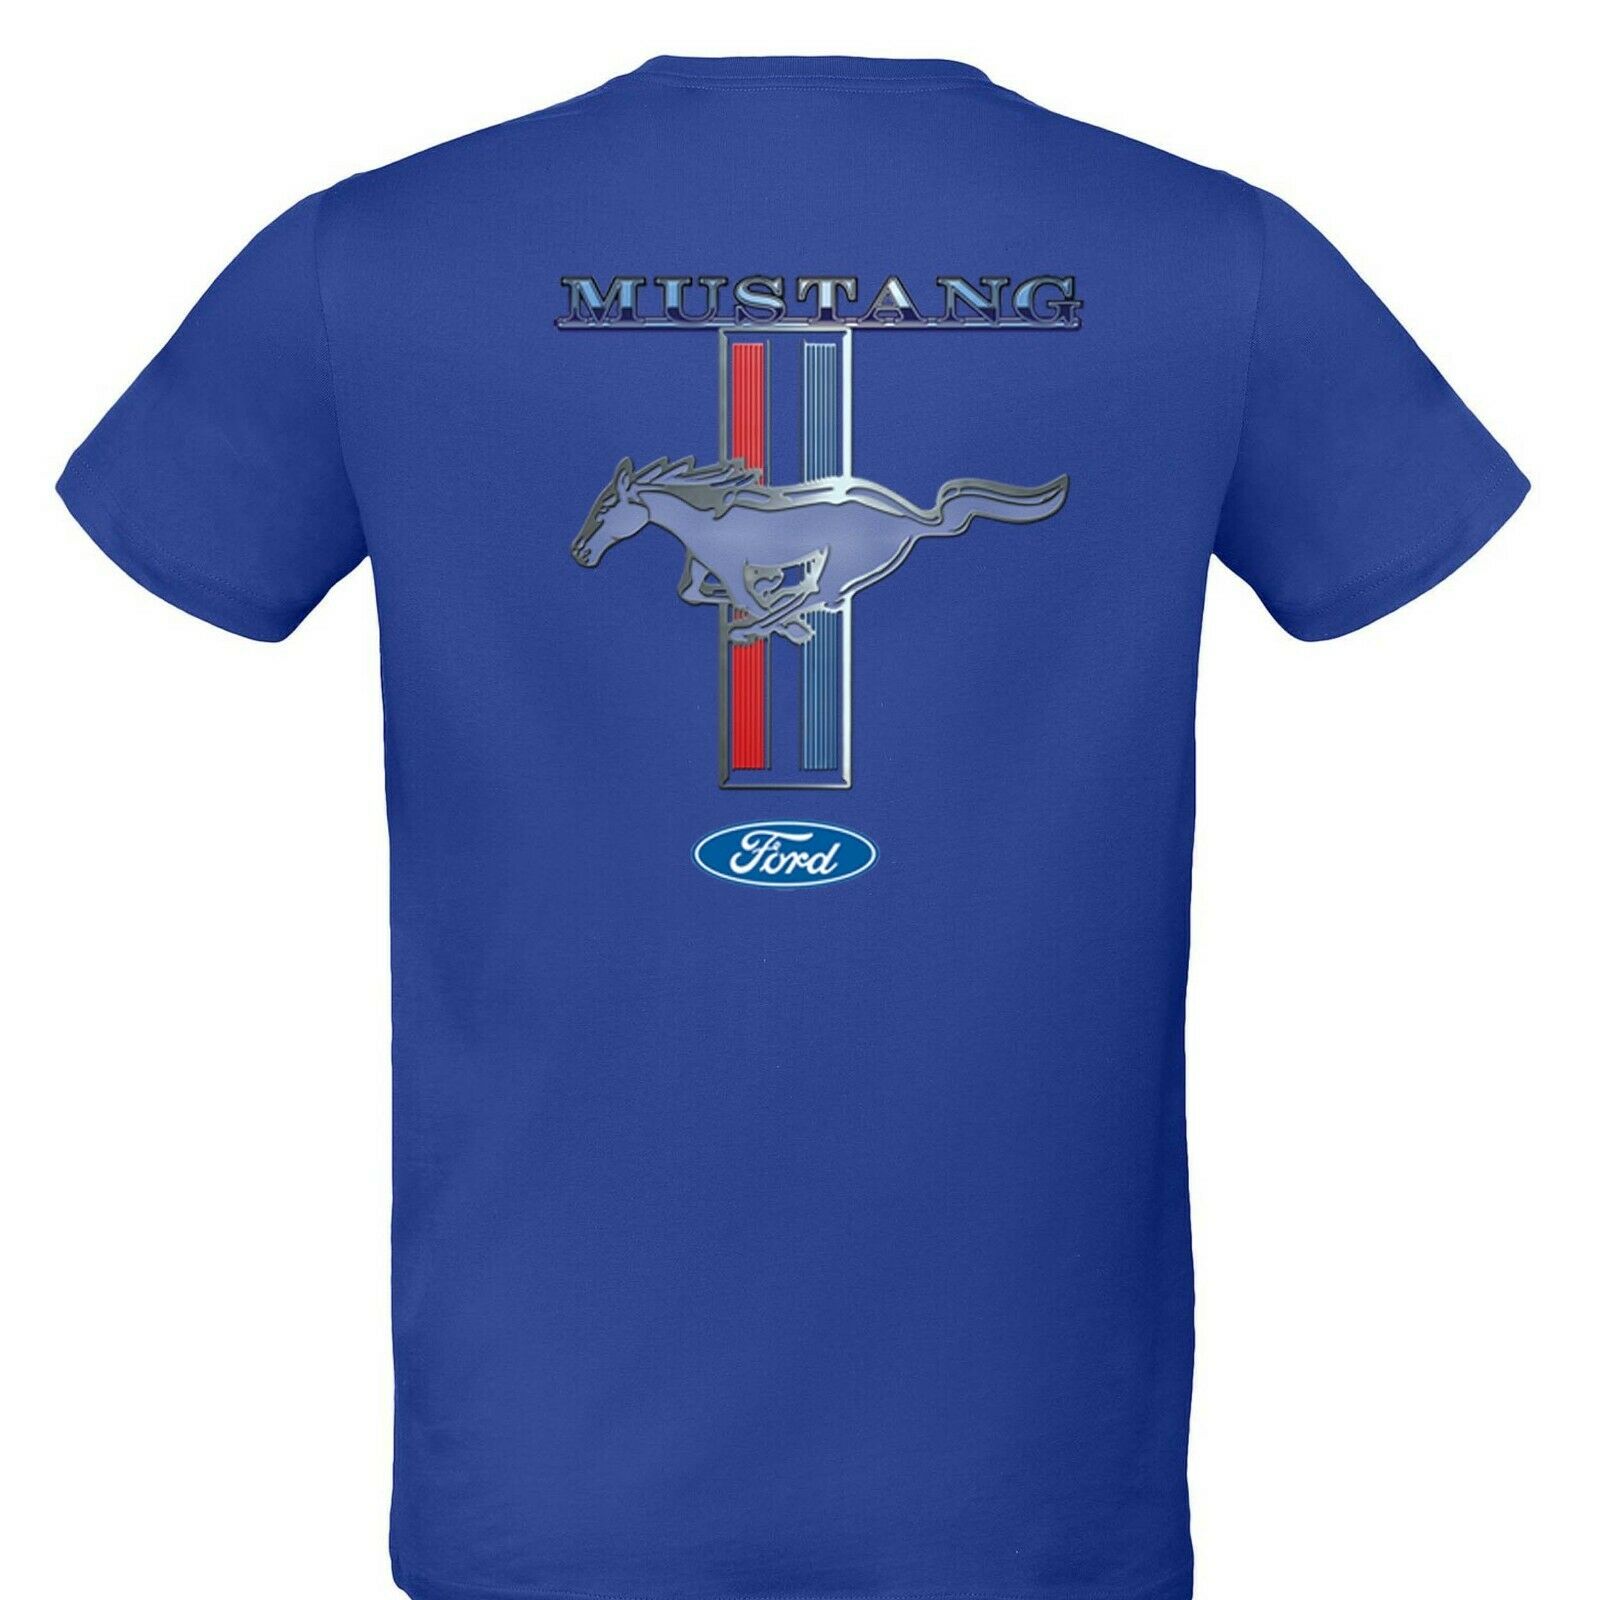 Mens Ford Mustang T Shirt Genuine Classic Vintage American Muscle Car Clothing